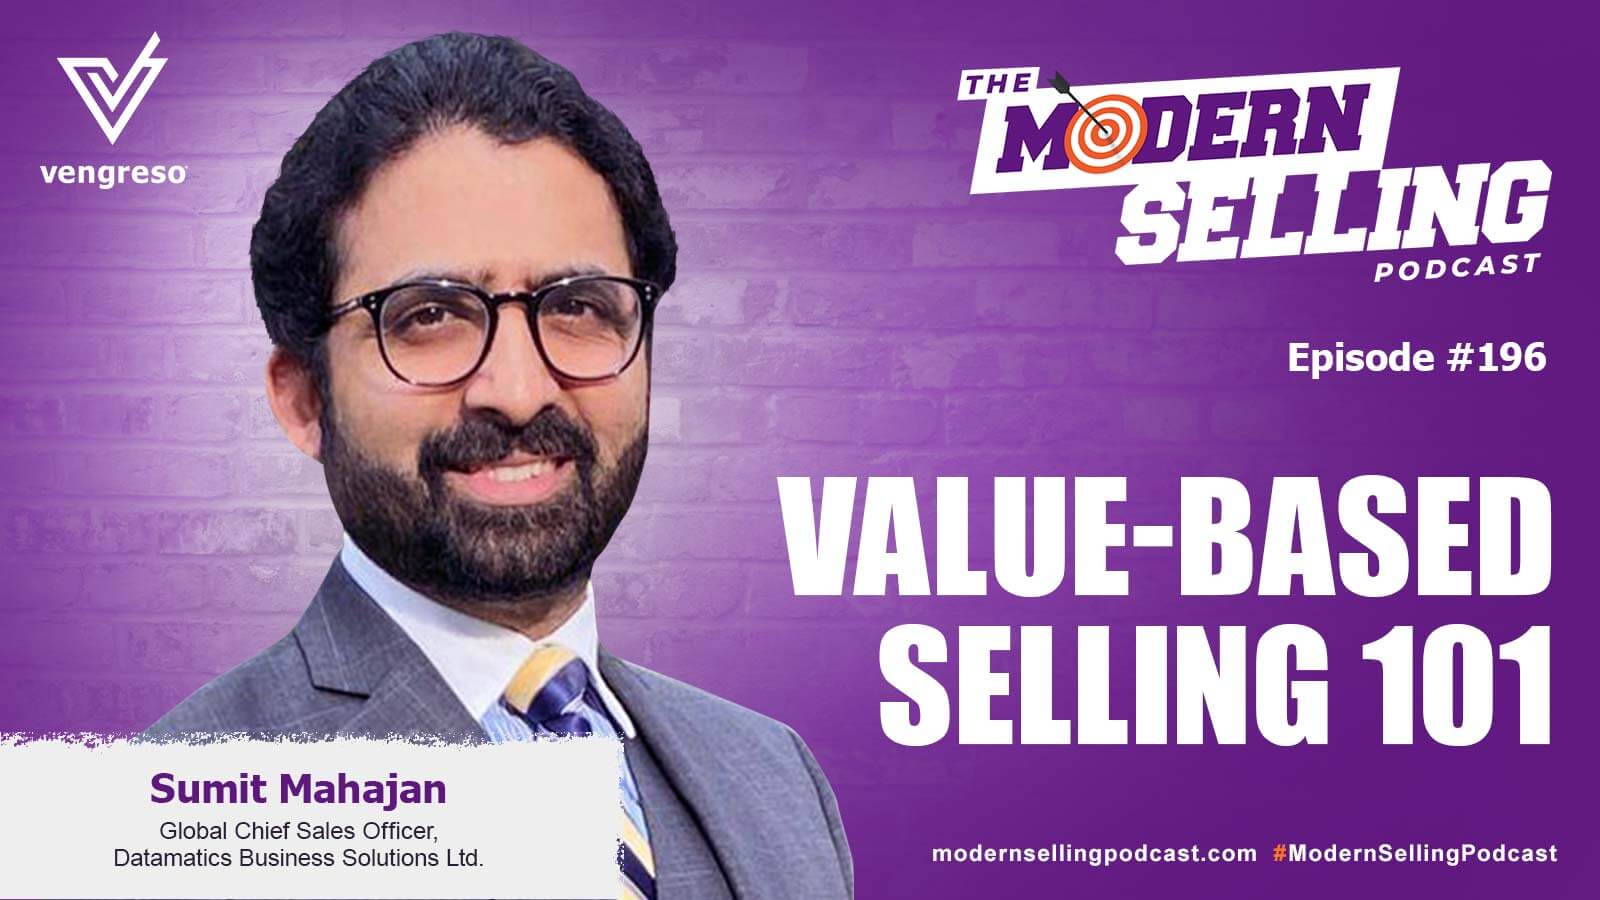 Value-Based Selling Podcast